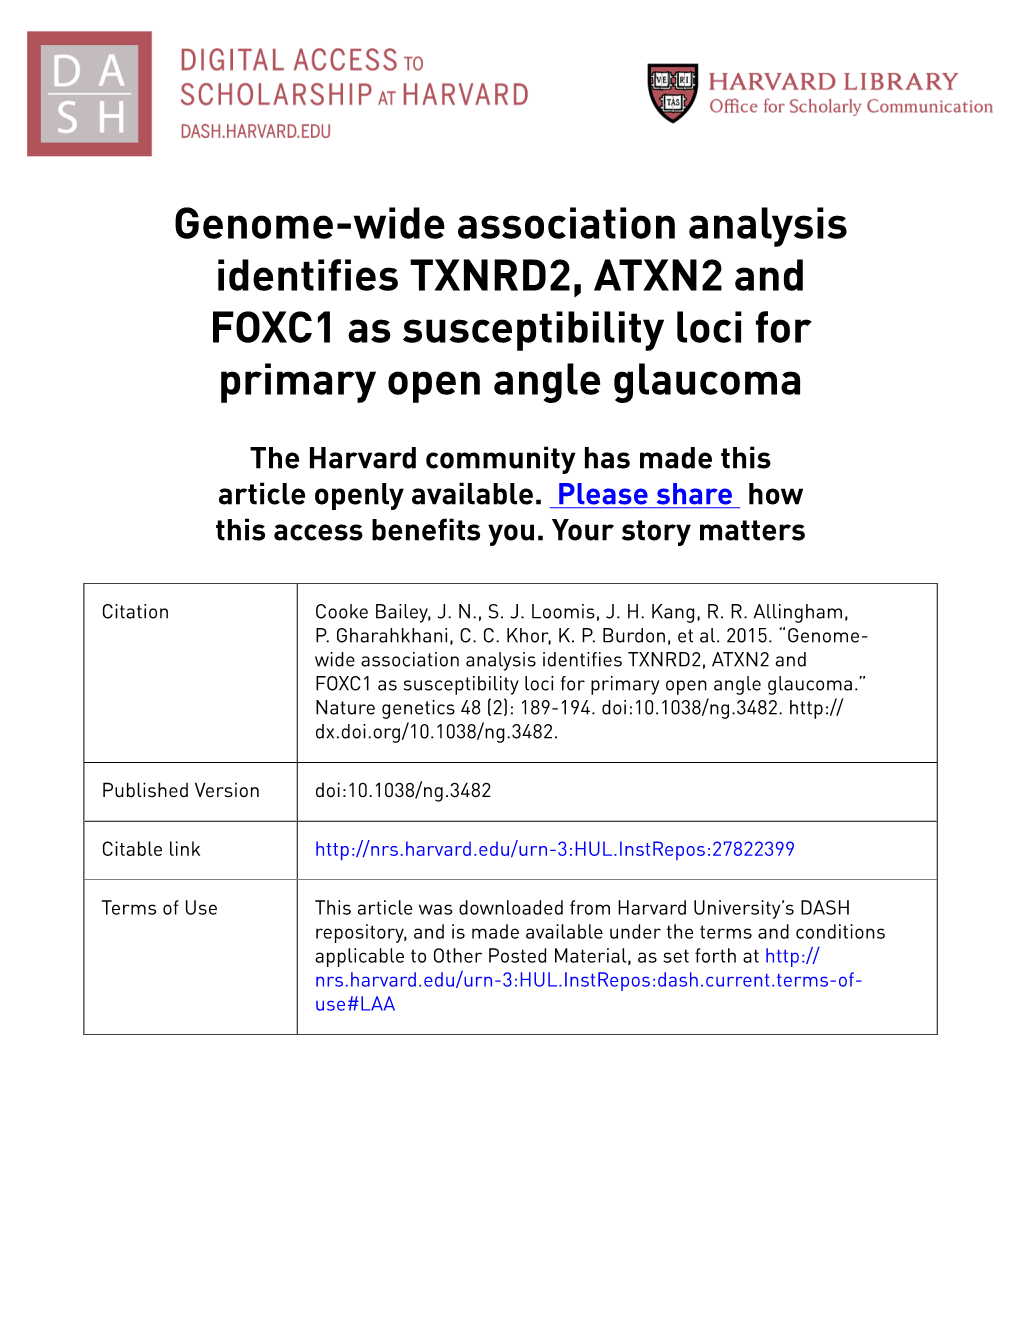 Genome-Wide Association Analysis Identifies TXNRD2, ATXN2 and FOXC1 As Susceptibility Loci for Primary Open Angle Glaucoma